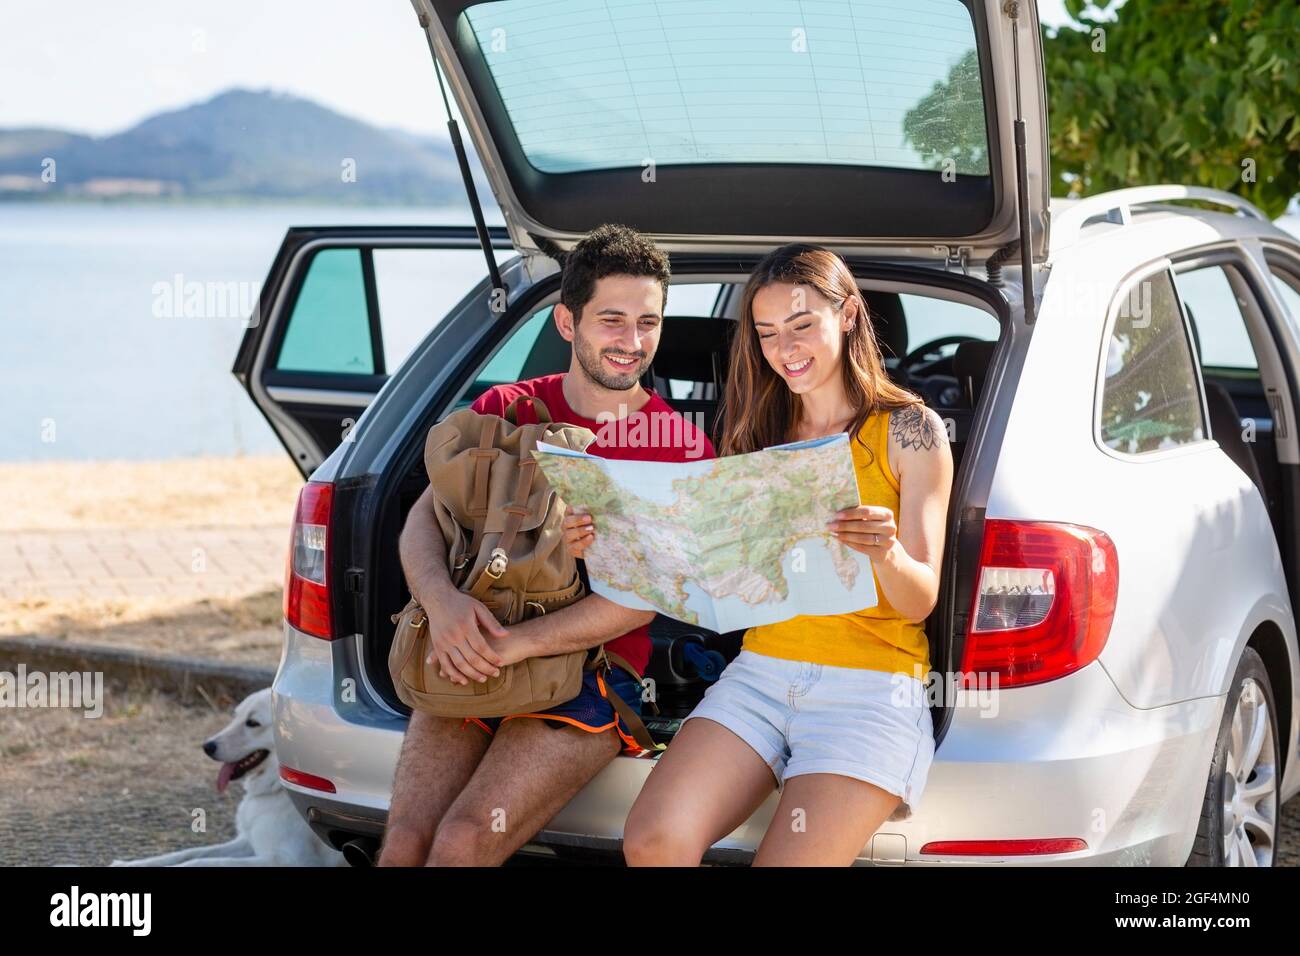 Smiling couple checking map while sitting in car trunk Stock Photo